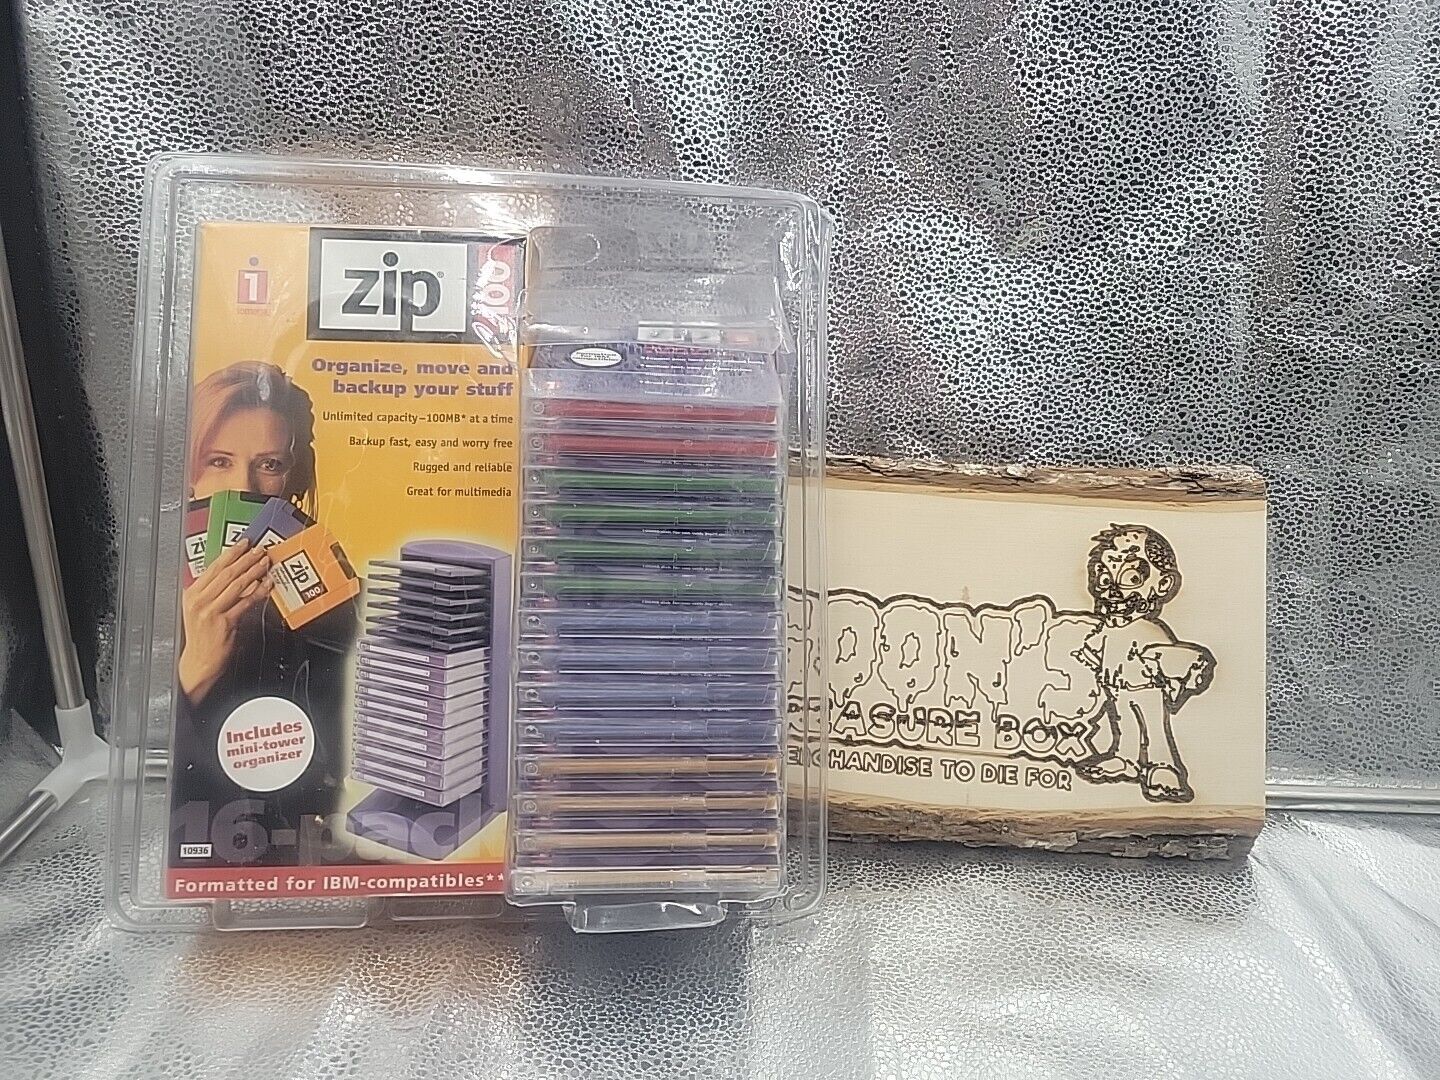 Iomega Zip Disks 100 MB Multicolored with Tower NOS Genuine Missing 2 Disks